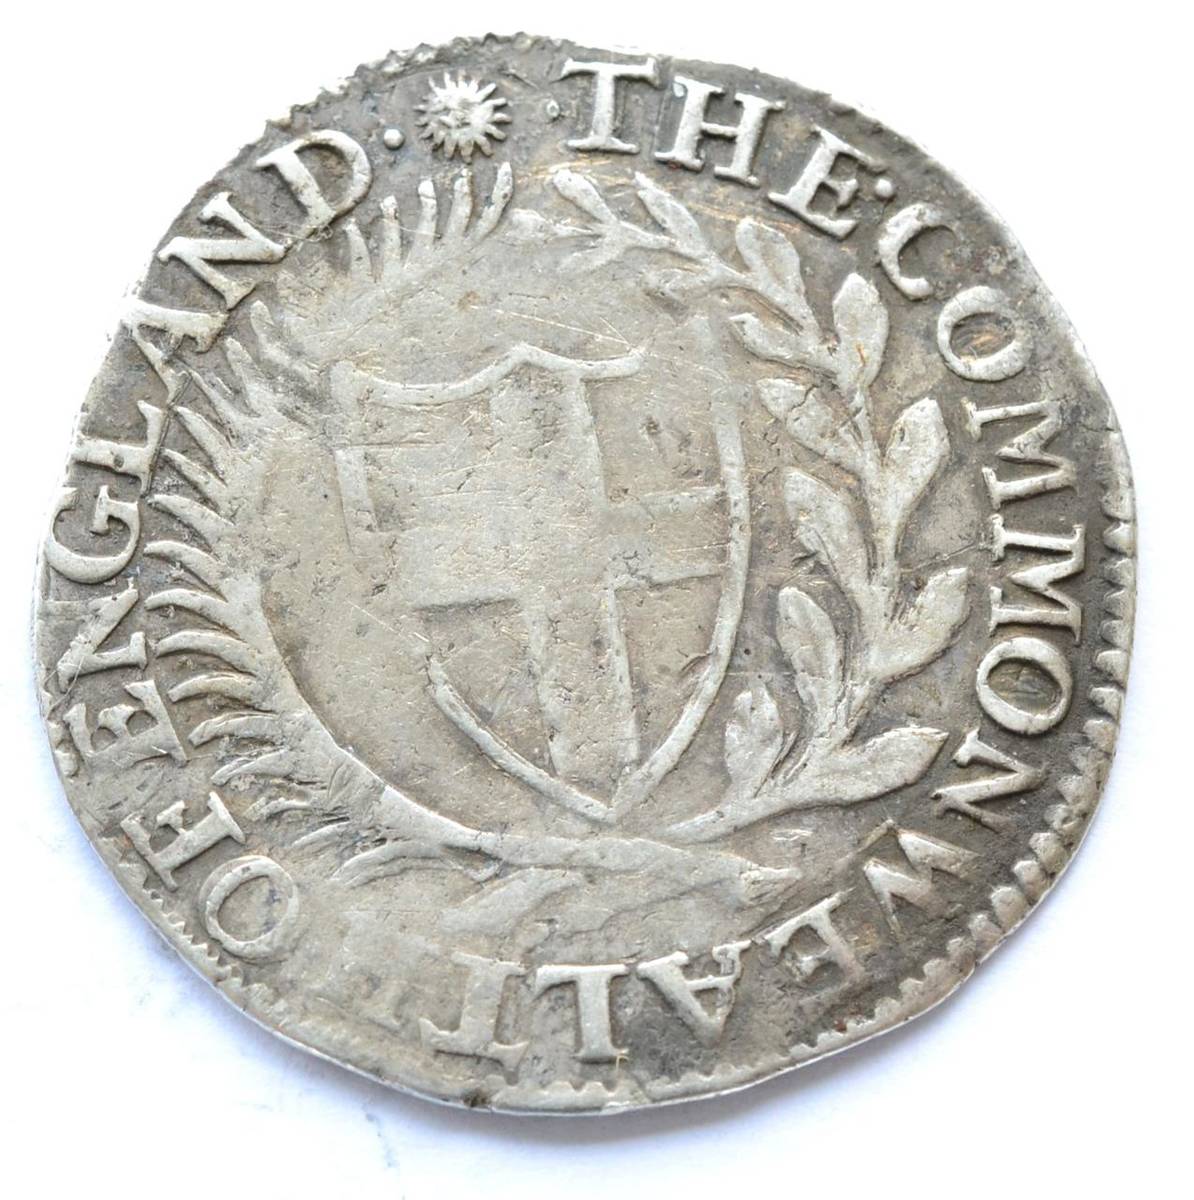 Lot 34 - Commonwealth Shilling 1651 MM sun; obv. struck slightly off-centre, a few contact marks, AFine